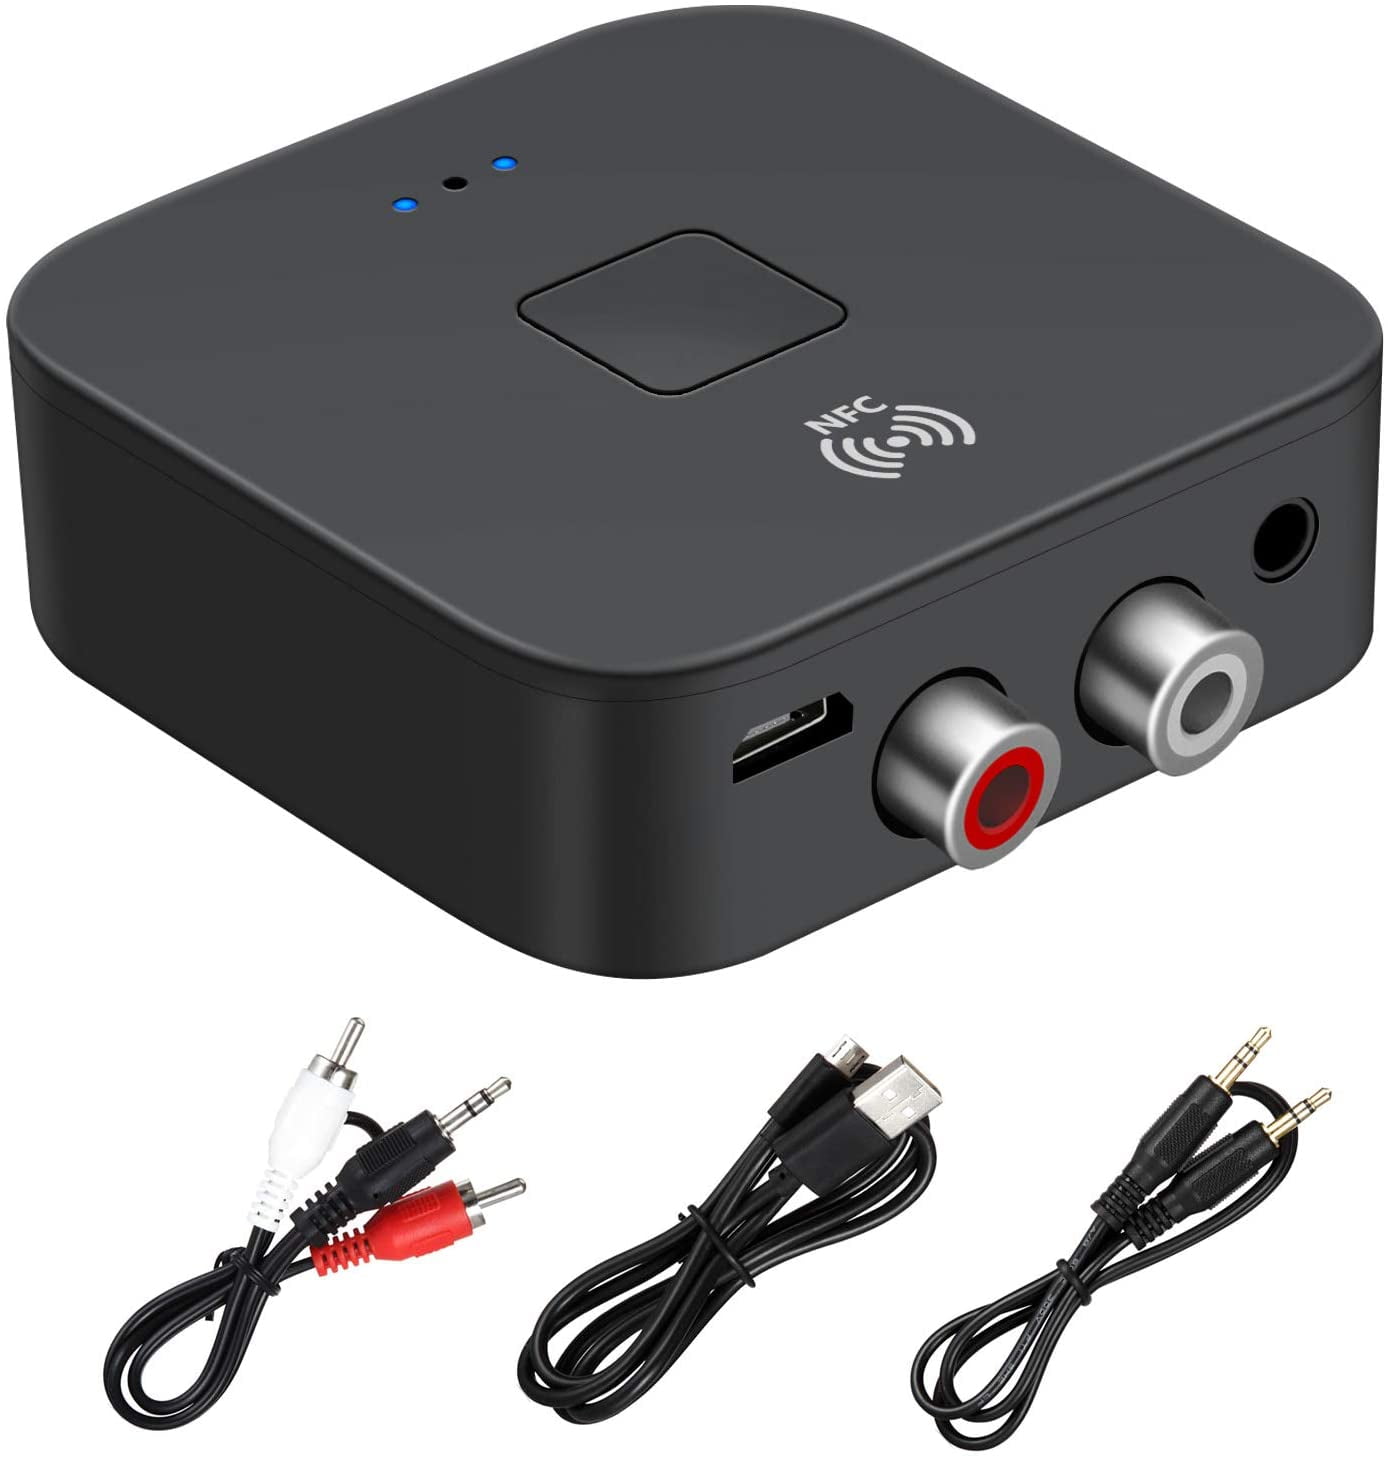 Portable Bluetooth Transmitter Receiver For Headphones Headset Bluetooth Audio Adapter Speaker,Car,Home Stereo Wireless Music Receiver with 3.5mm AUX Jack Stereo Receiver